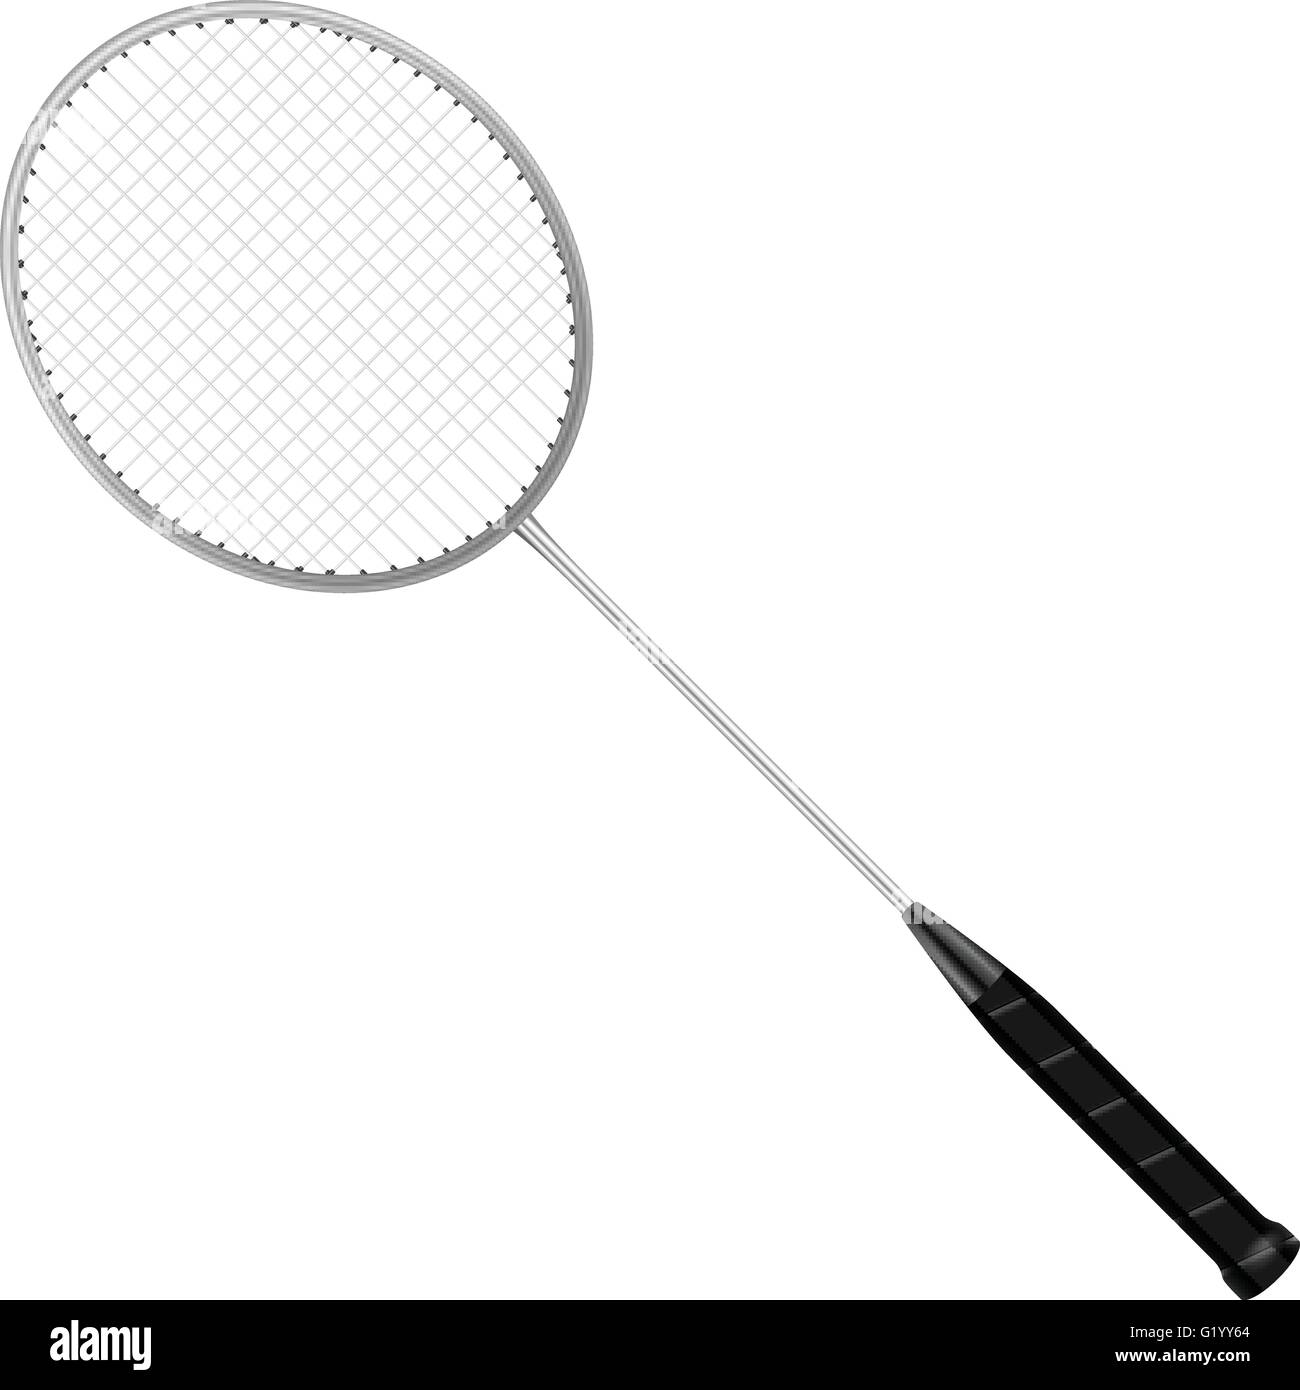 Badminton racket on a white background. Stock Vector